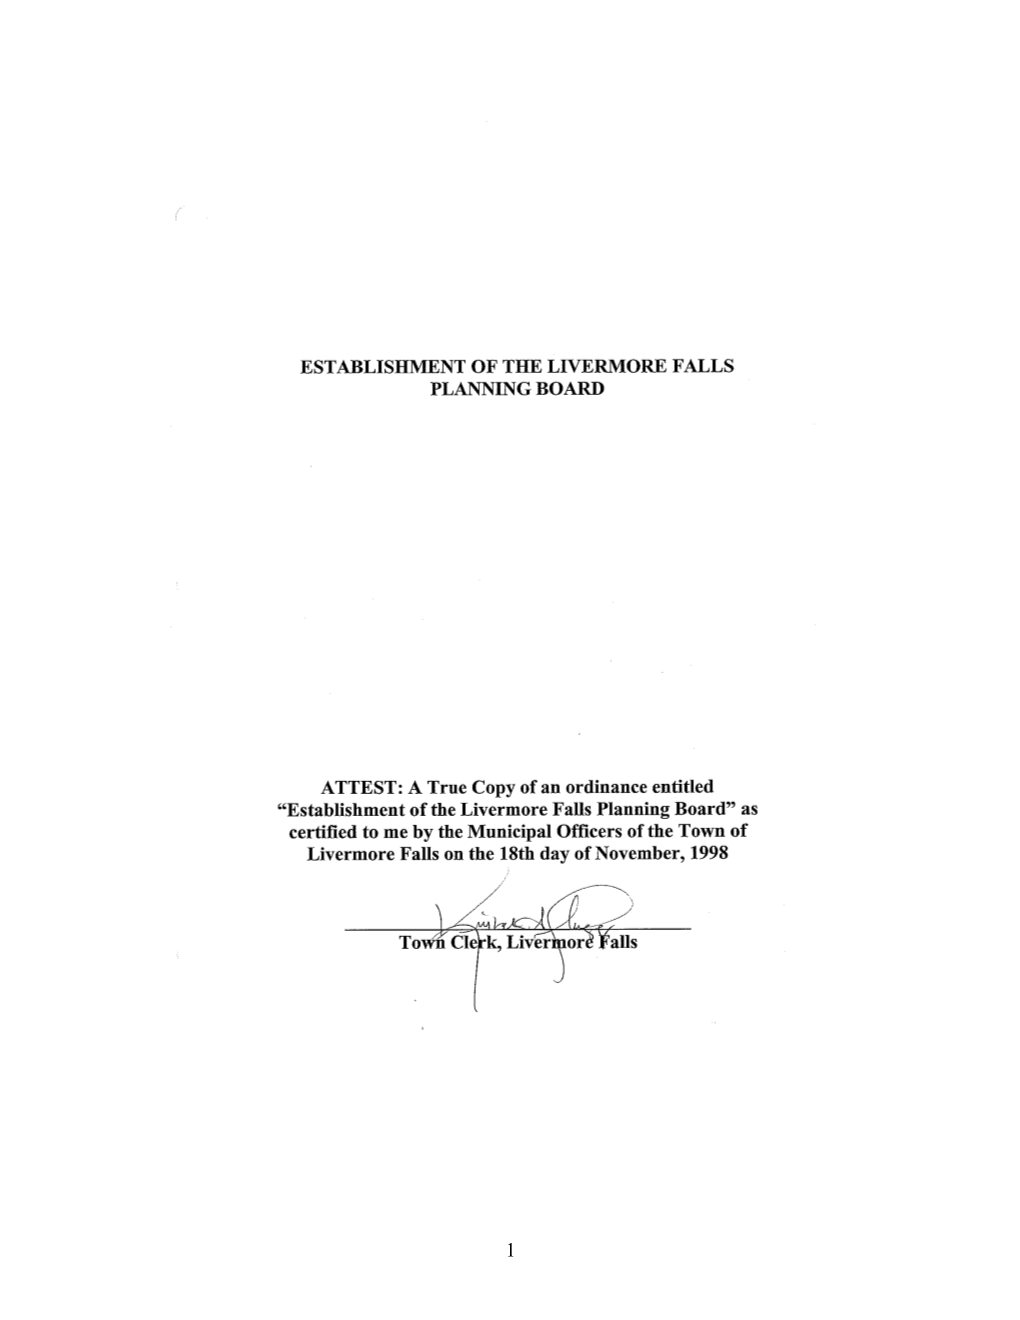 Establiment of the Town of Livermore Falls Planning Board